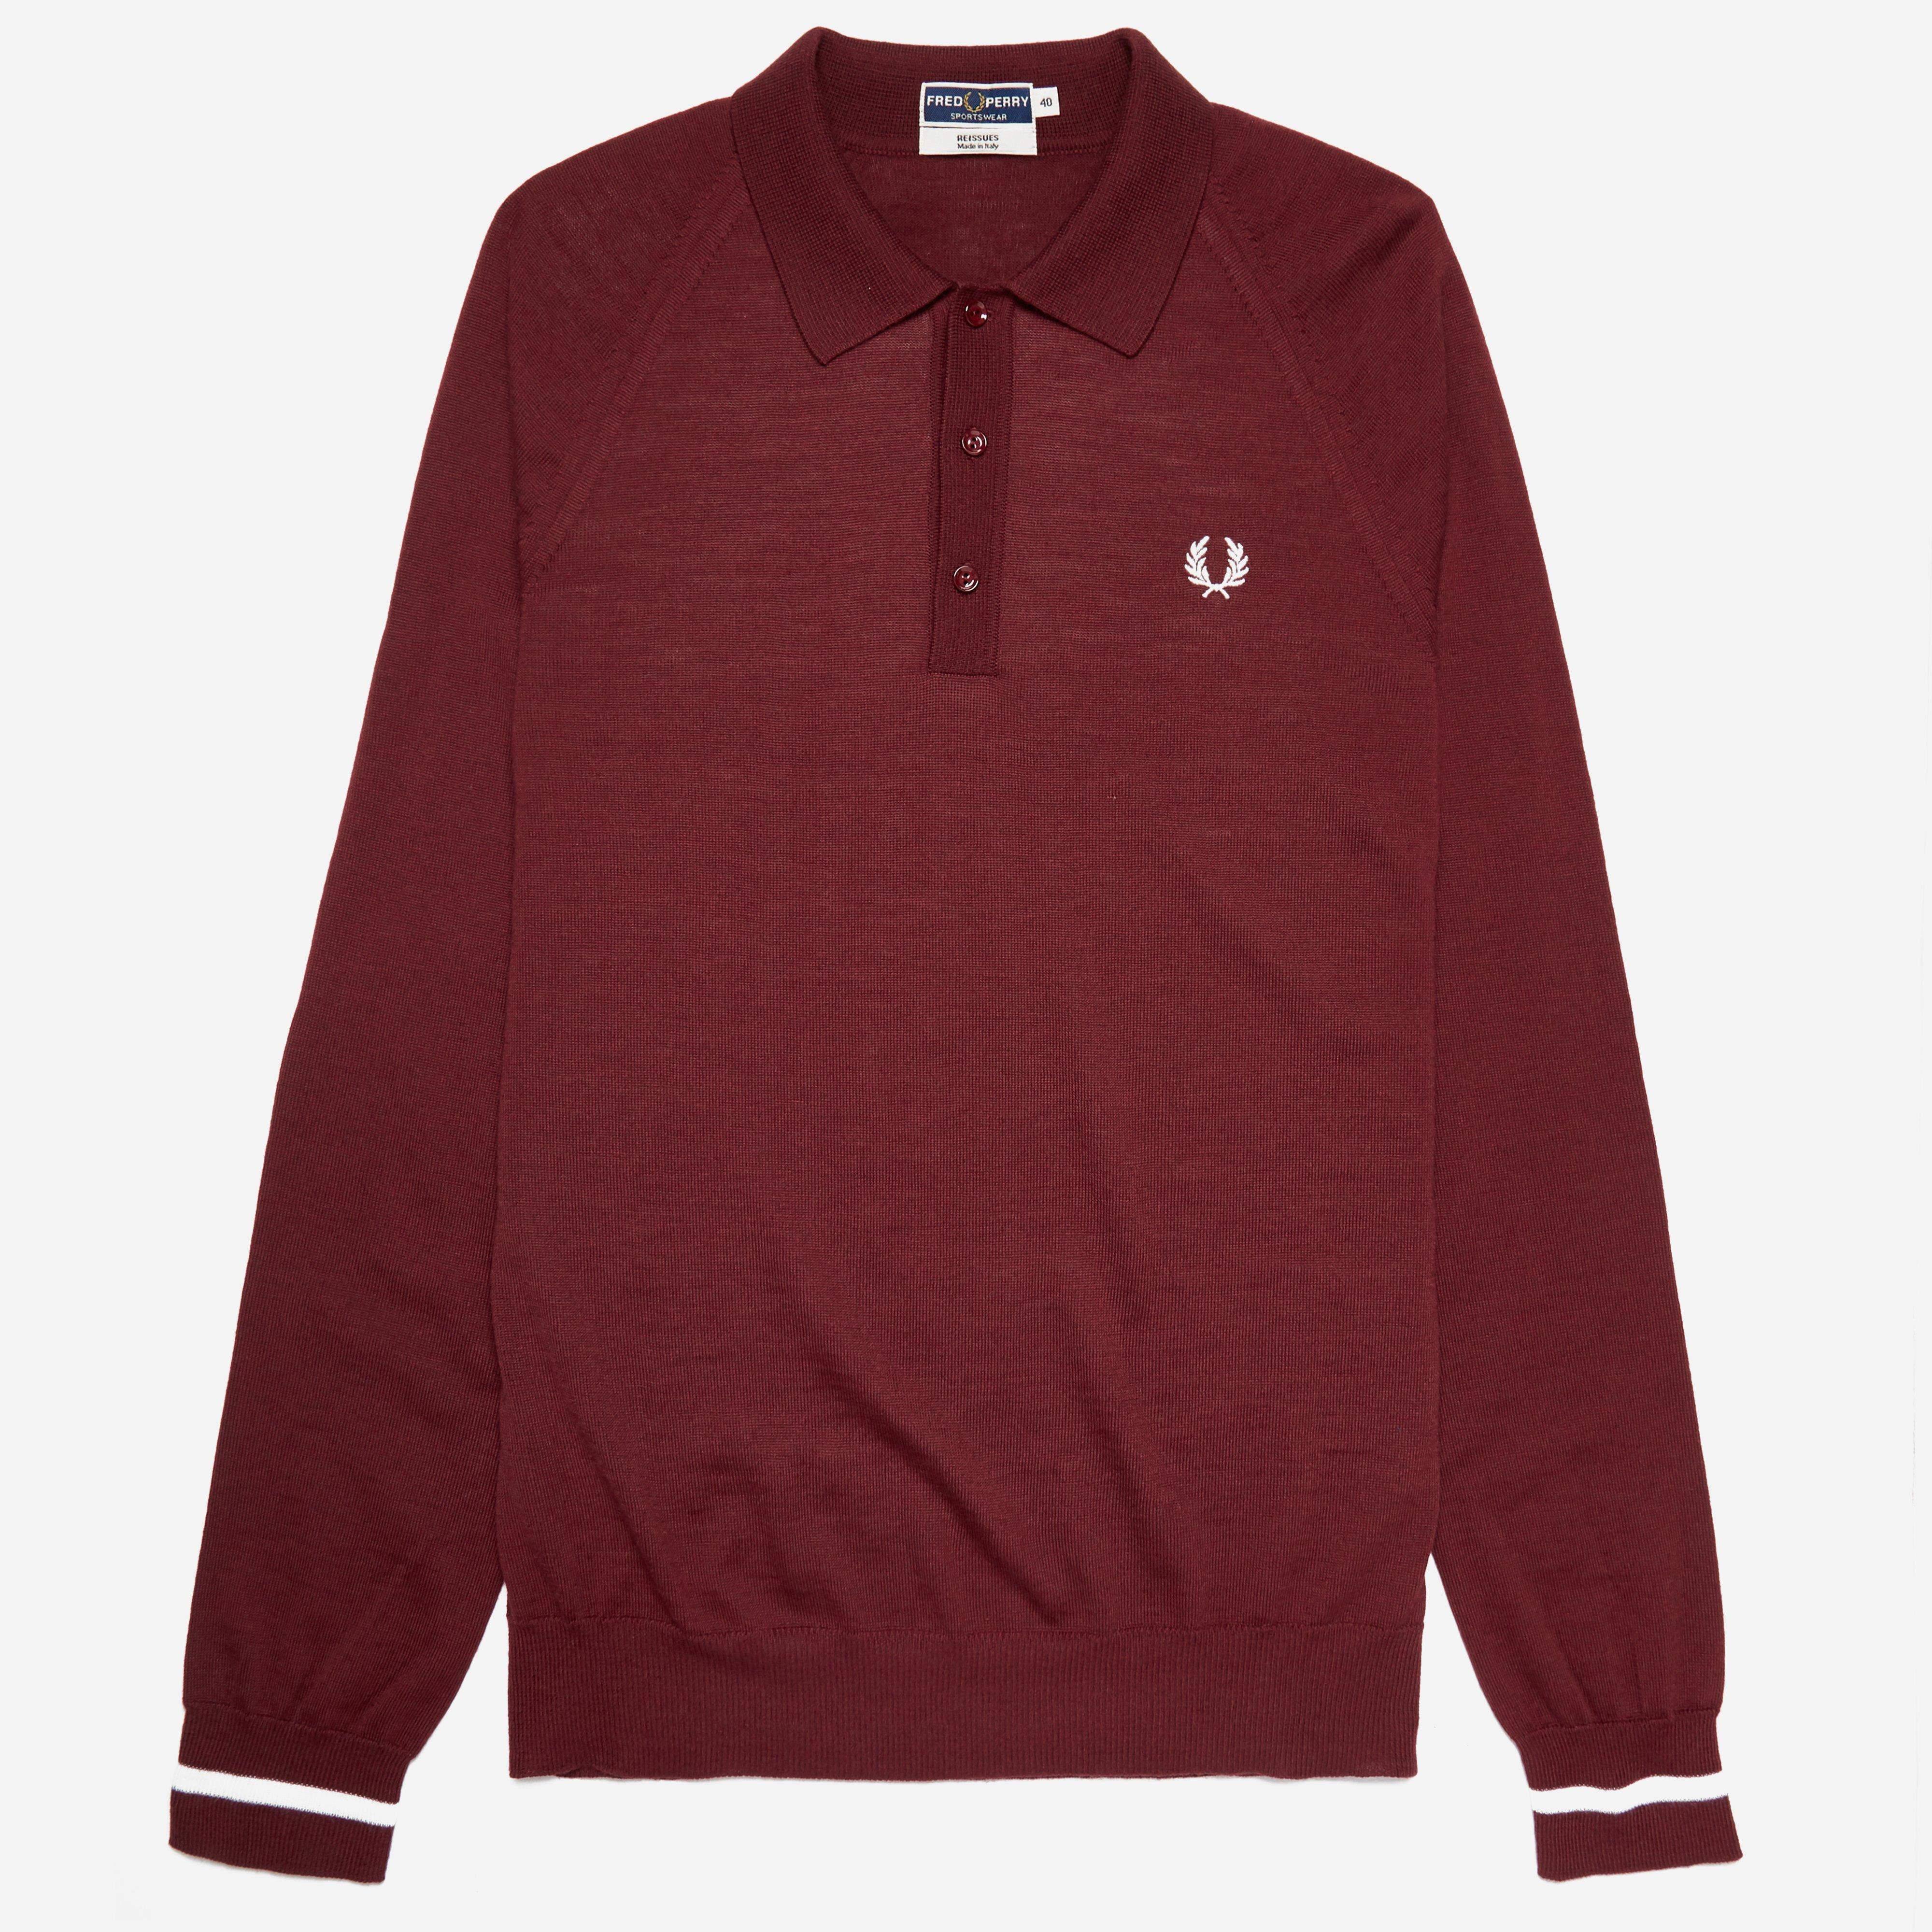 Fred Perry Long Sleeve Tipped Knitted Polo in Burgundy (Red) for Men - Lyst